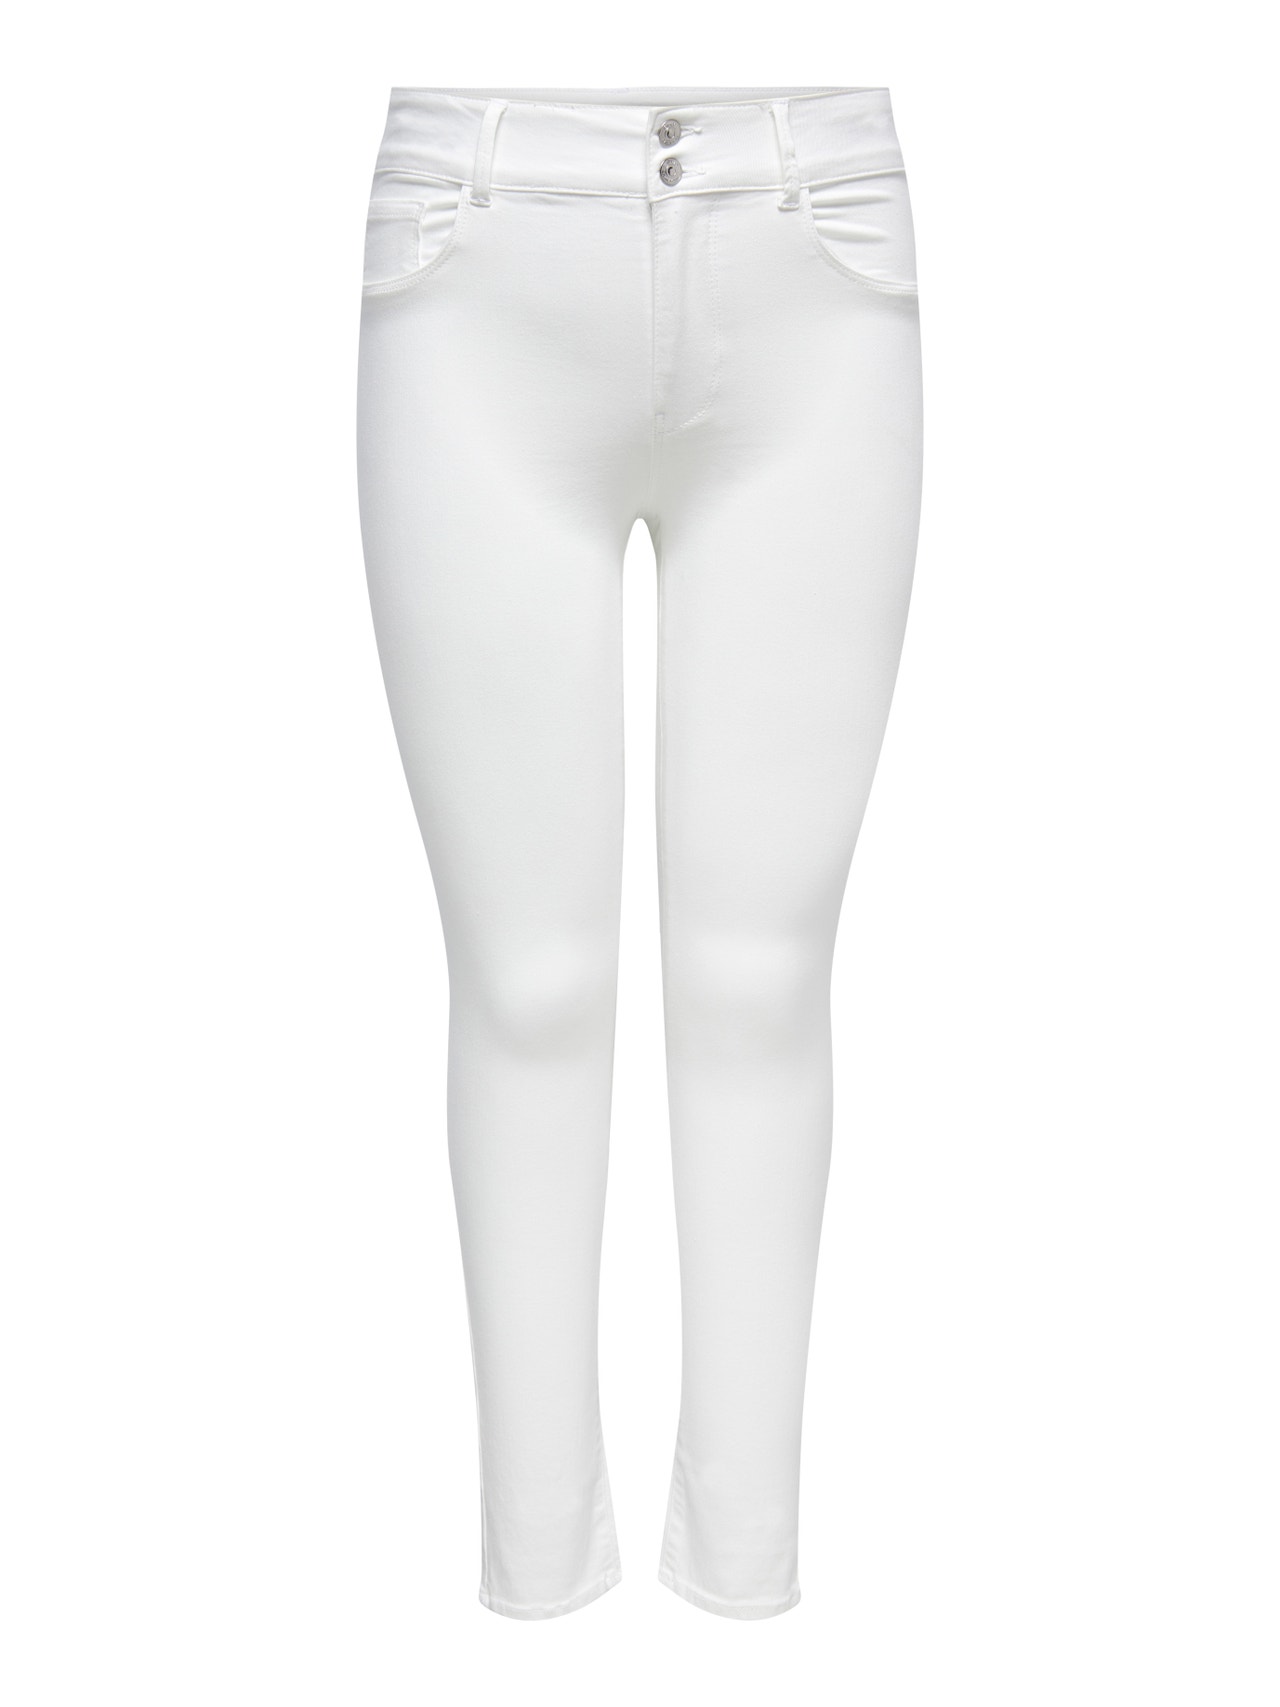 ONLY Curvy CARStorm highwaisted Skinny fit jeans -White - 15259822